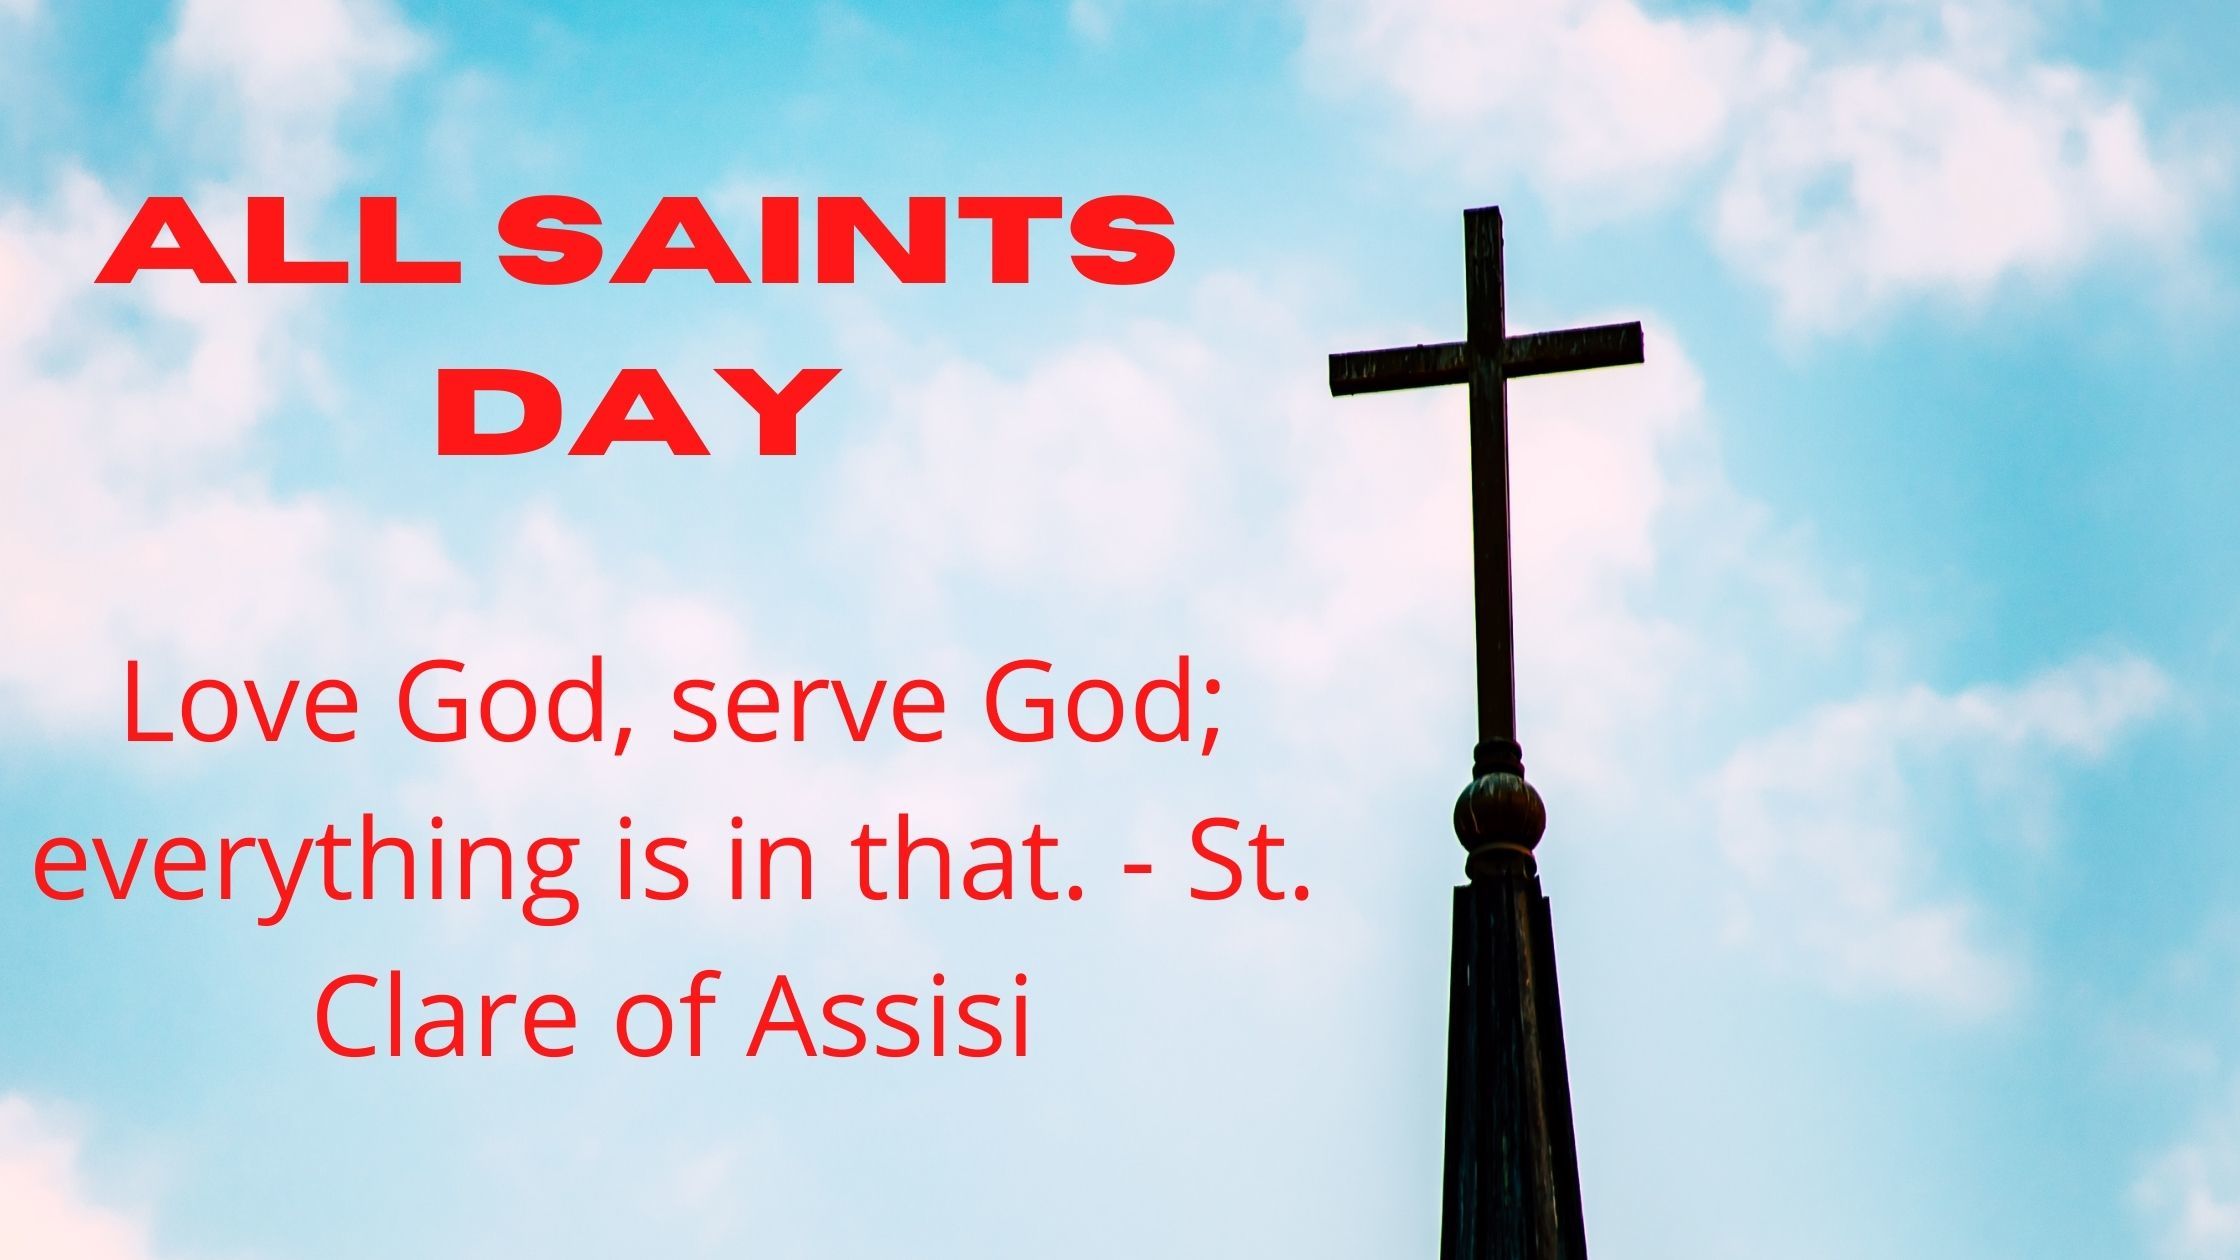 All Saints’ Day Quotes images